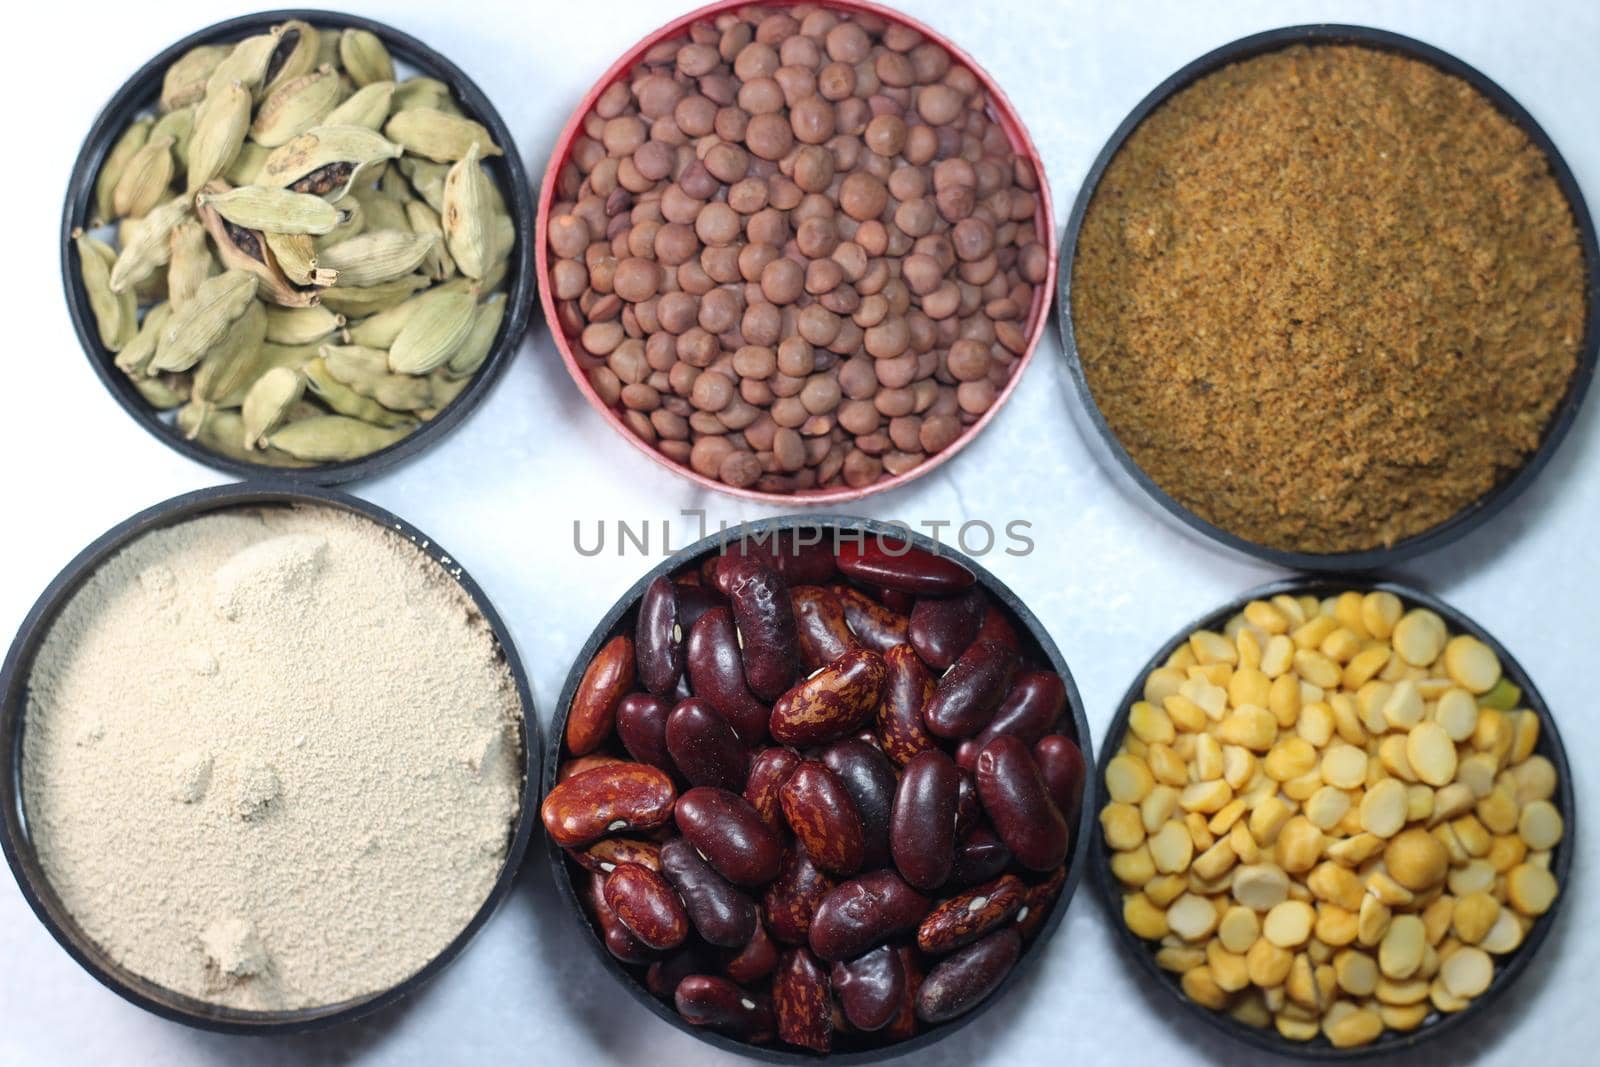 Top view of assortment of cereals, and cardamom. Collection of different spices and cereals.